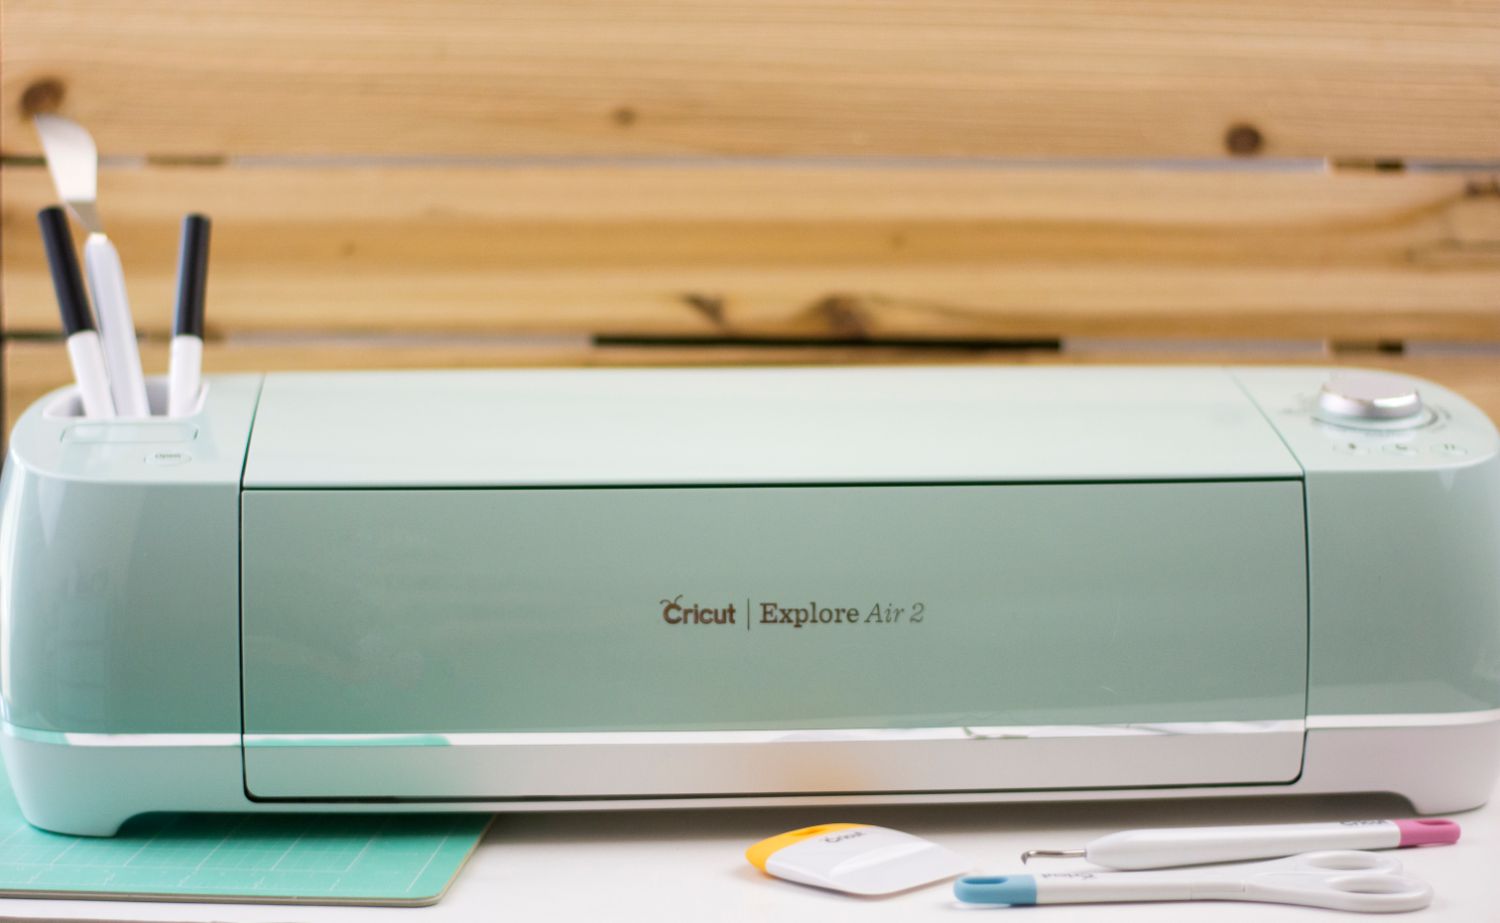 Get to Know the Cricut Explore Air 2